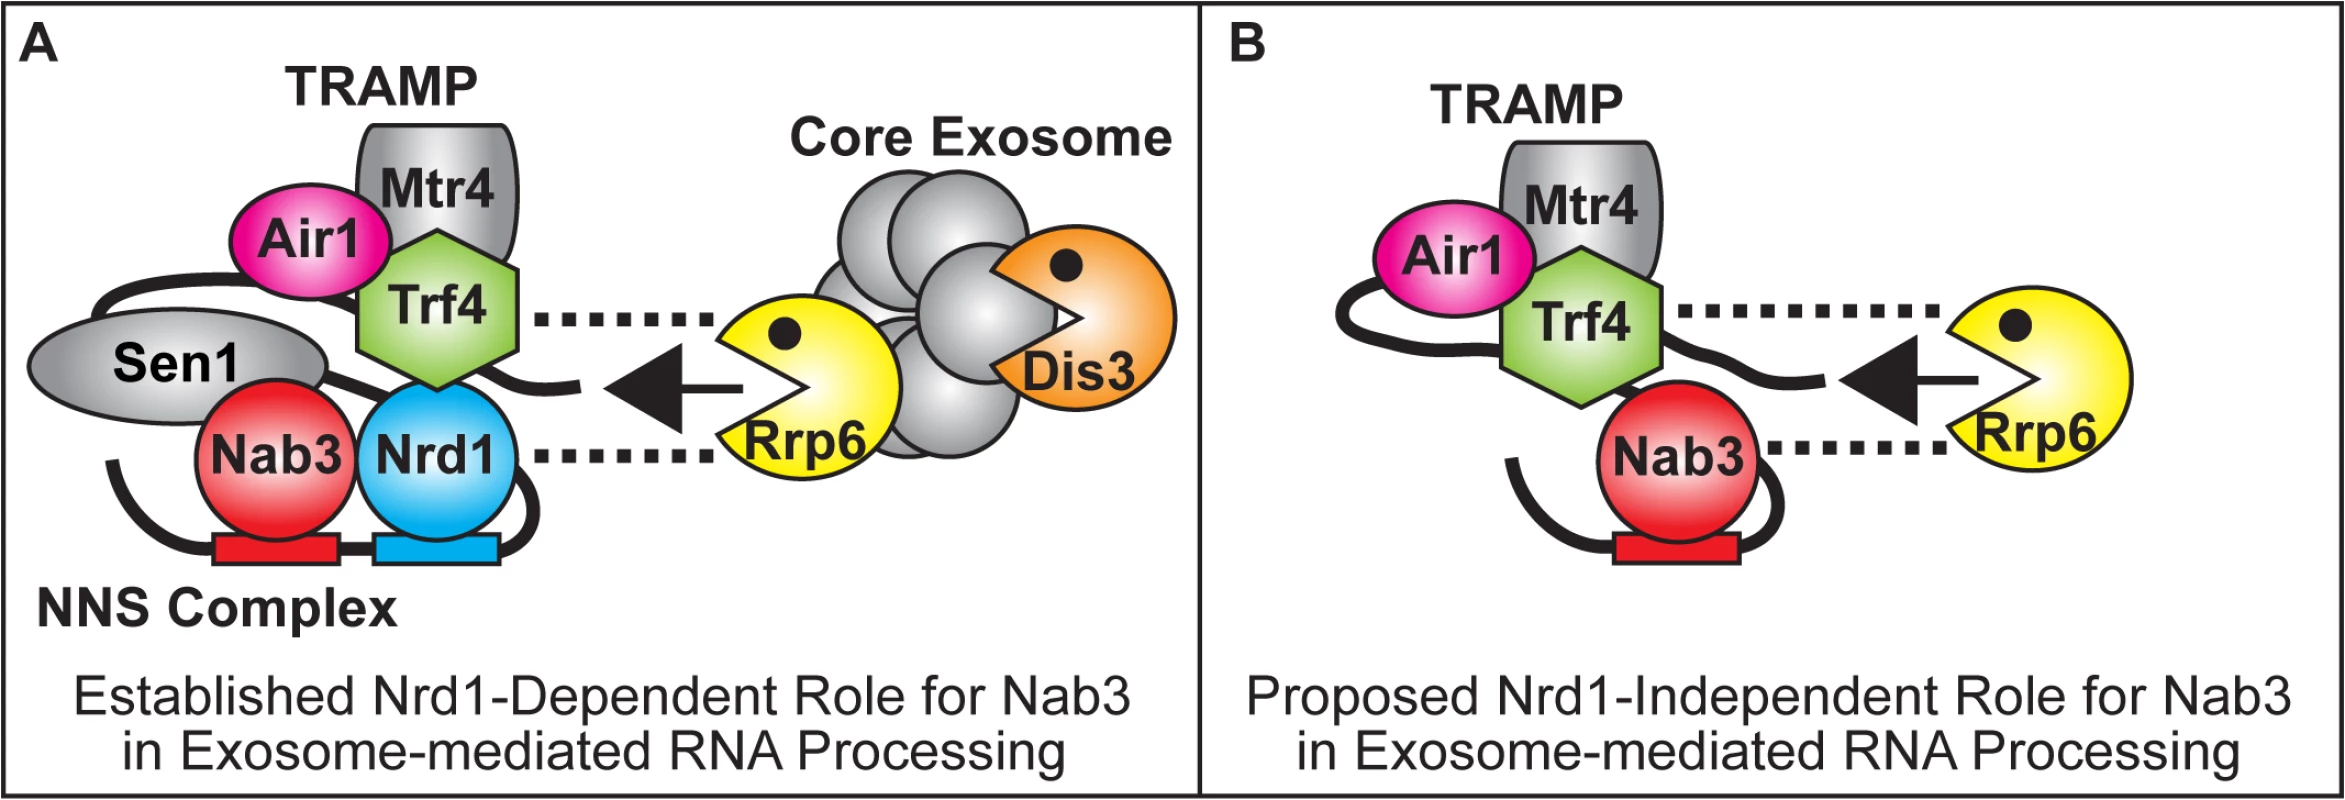 Model for Nrd1-dependent and Nrd1-independent roles of Nab3 in facilitating TRAMP function in the recruitment of the exosome for RNA processing/degradation.